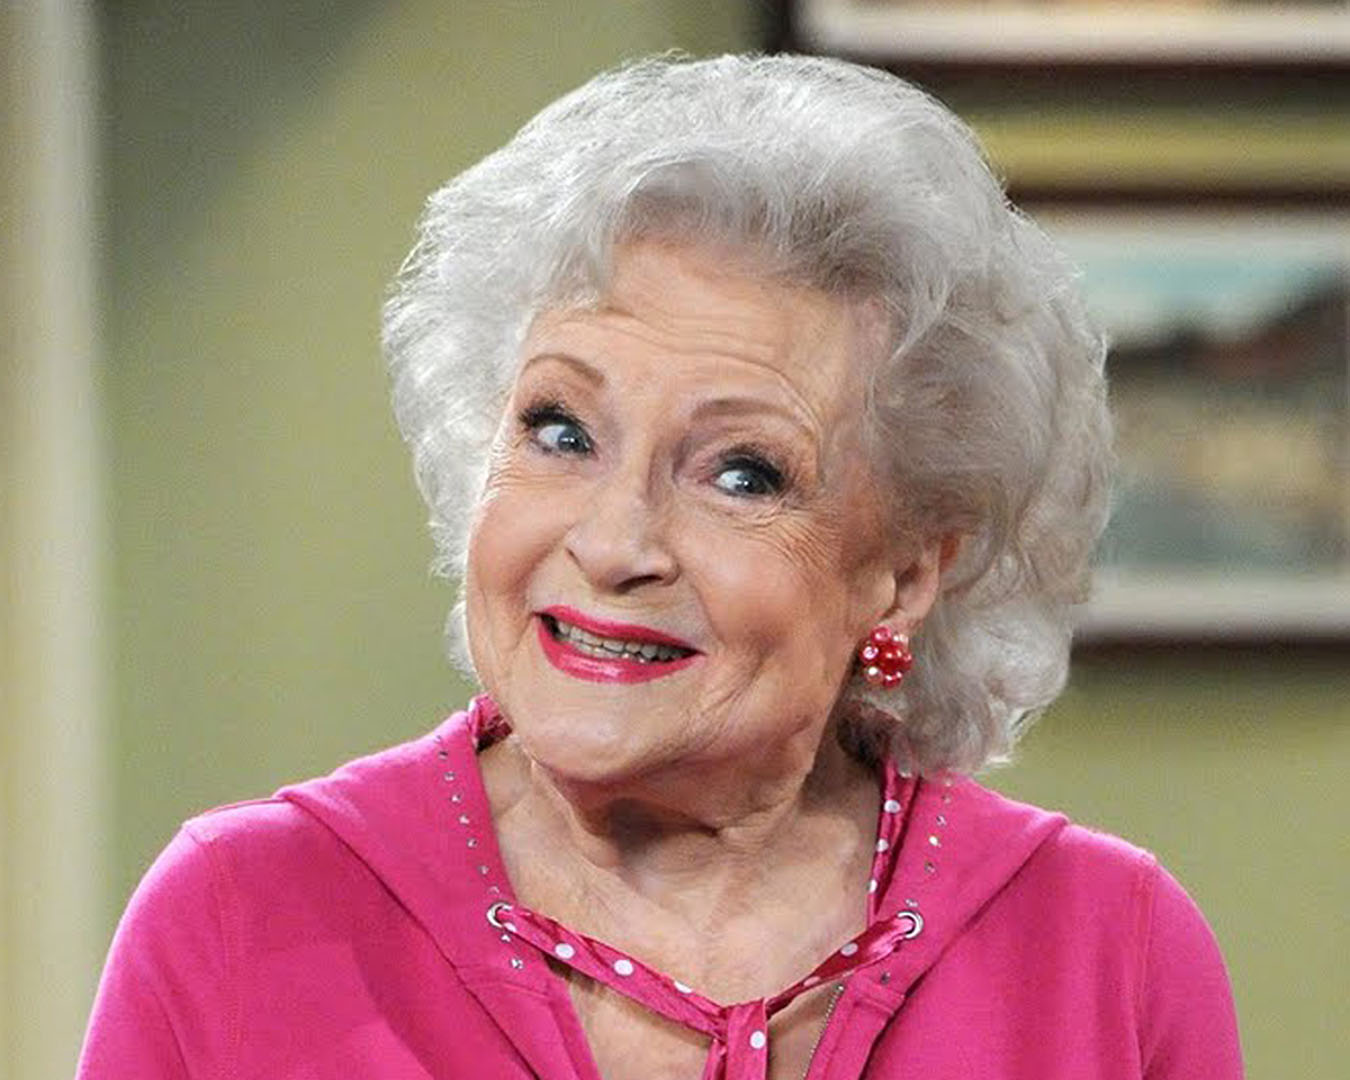 Betty White smiles at the camera.